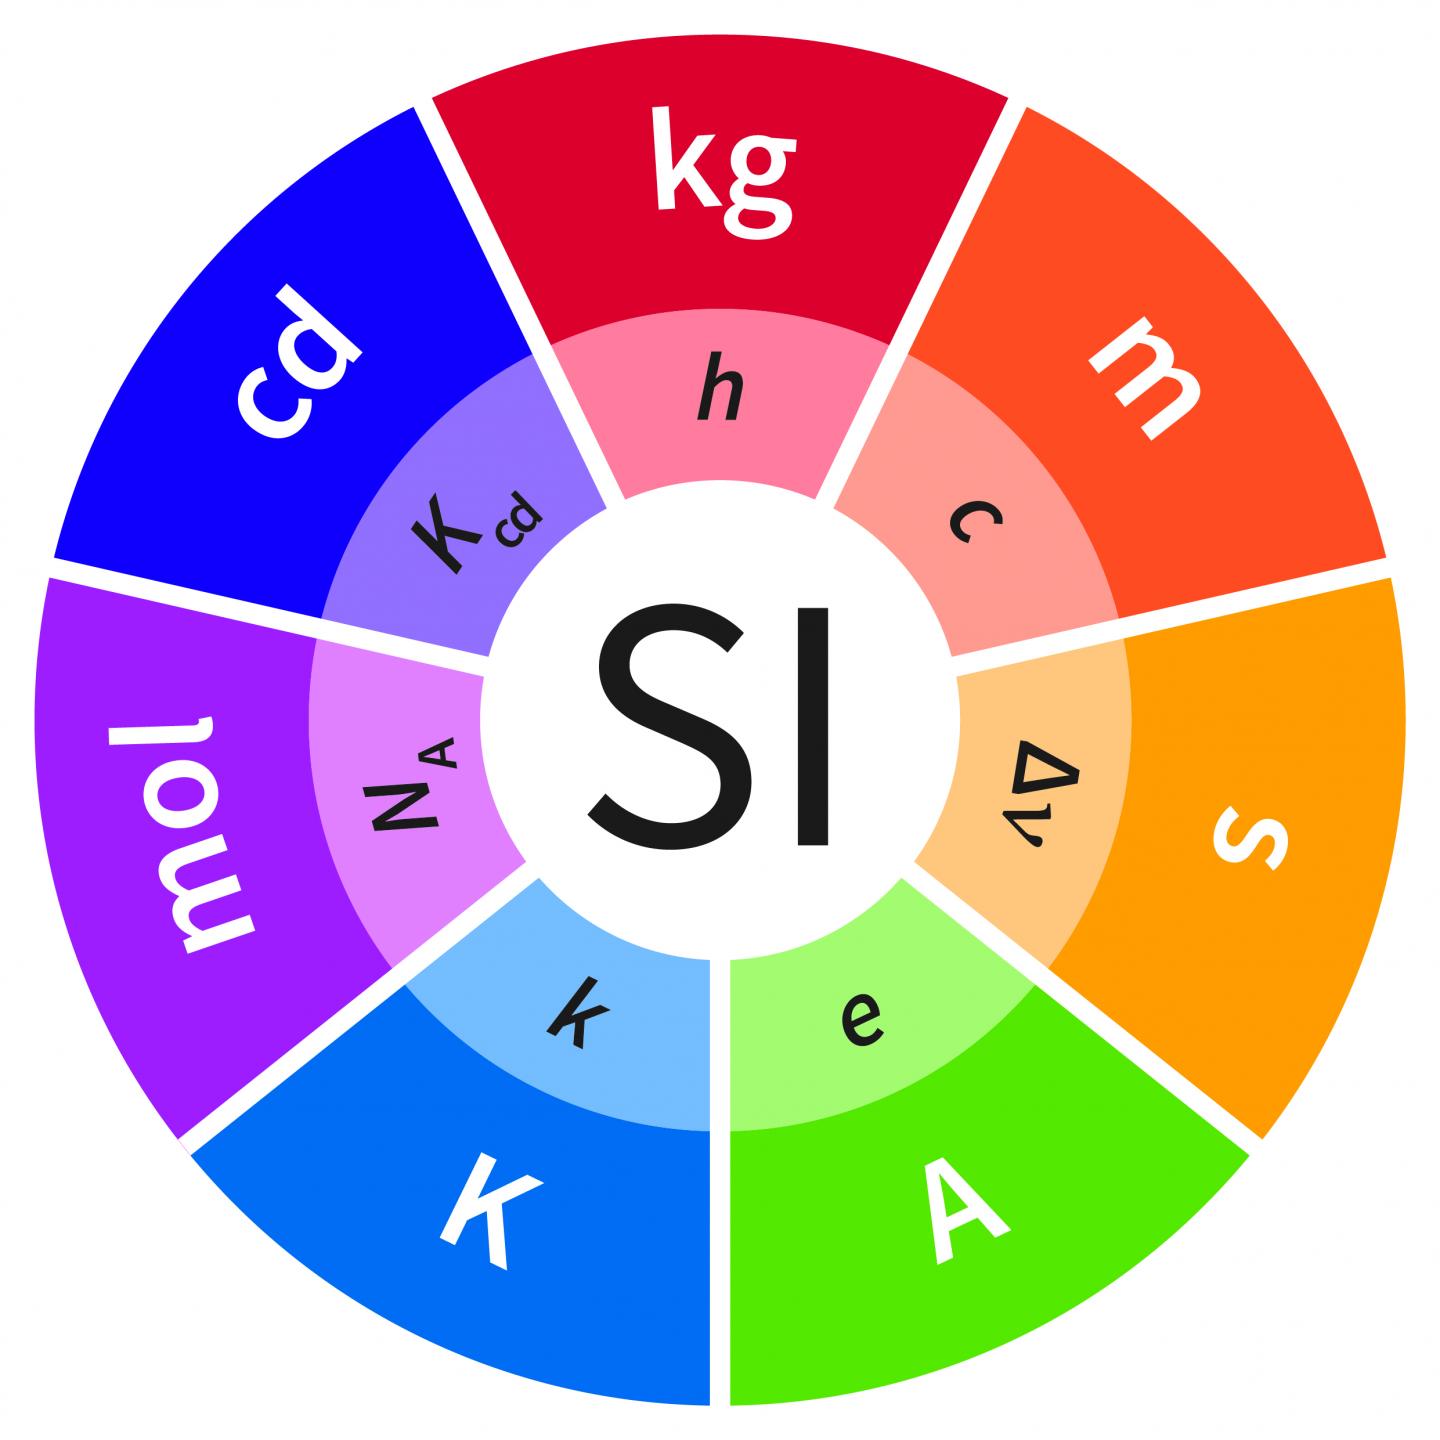 In the new International System of Units (SI), seven fundamental constants will be determined as defining reference entities. The seven base units -- arranged in the outer circle of the diagram -- will lose their prominent role